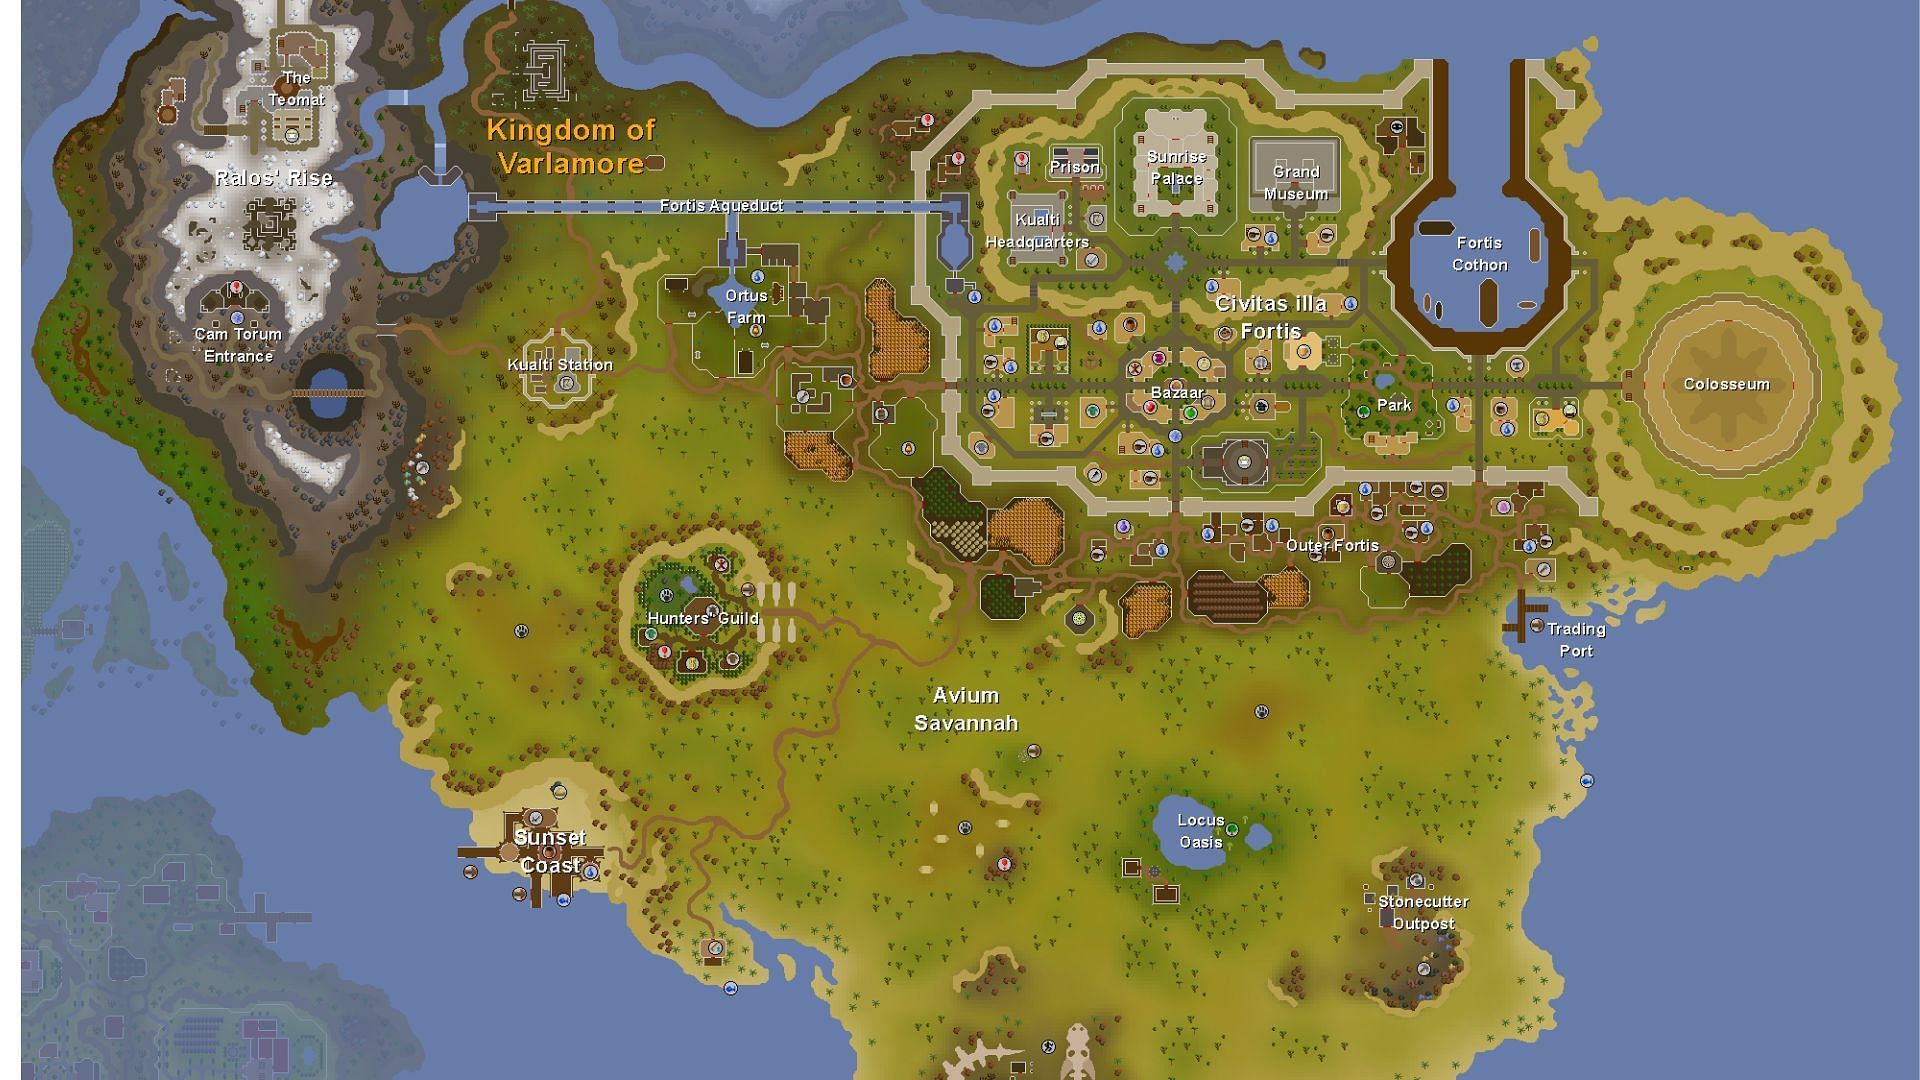 To reach Varlamore, you must first complete the Children of the Sun quest (Image via Jagex)